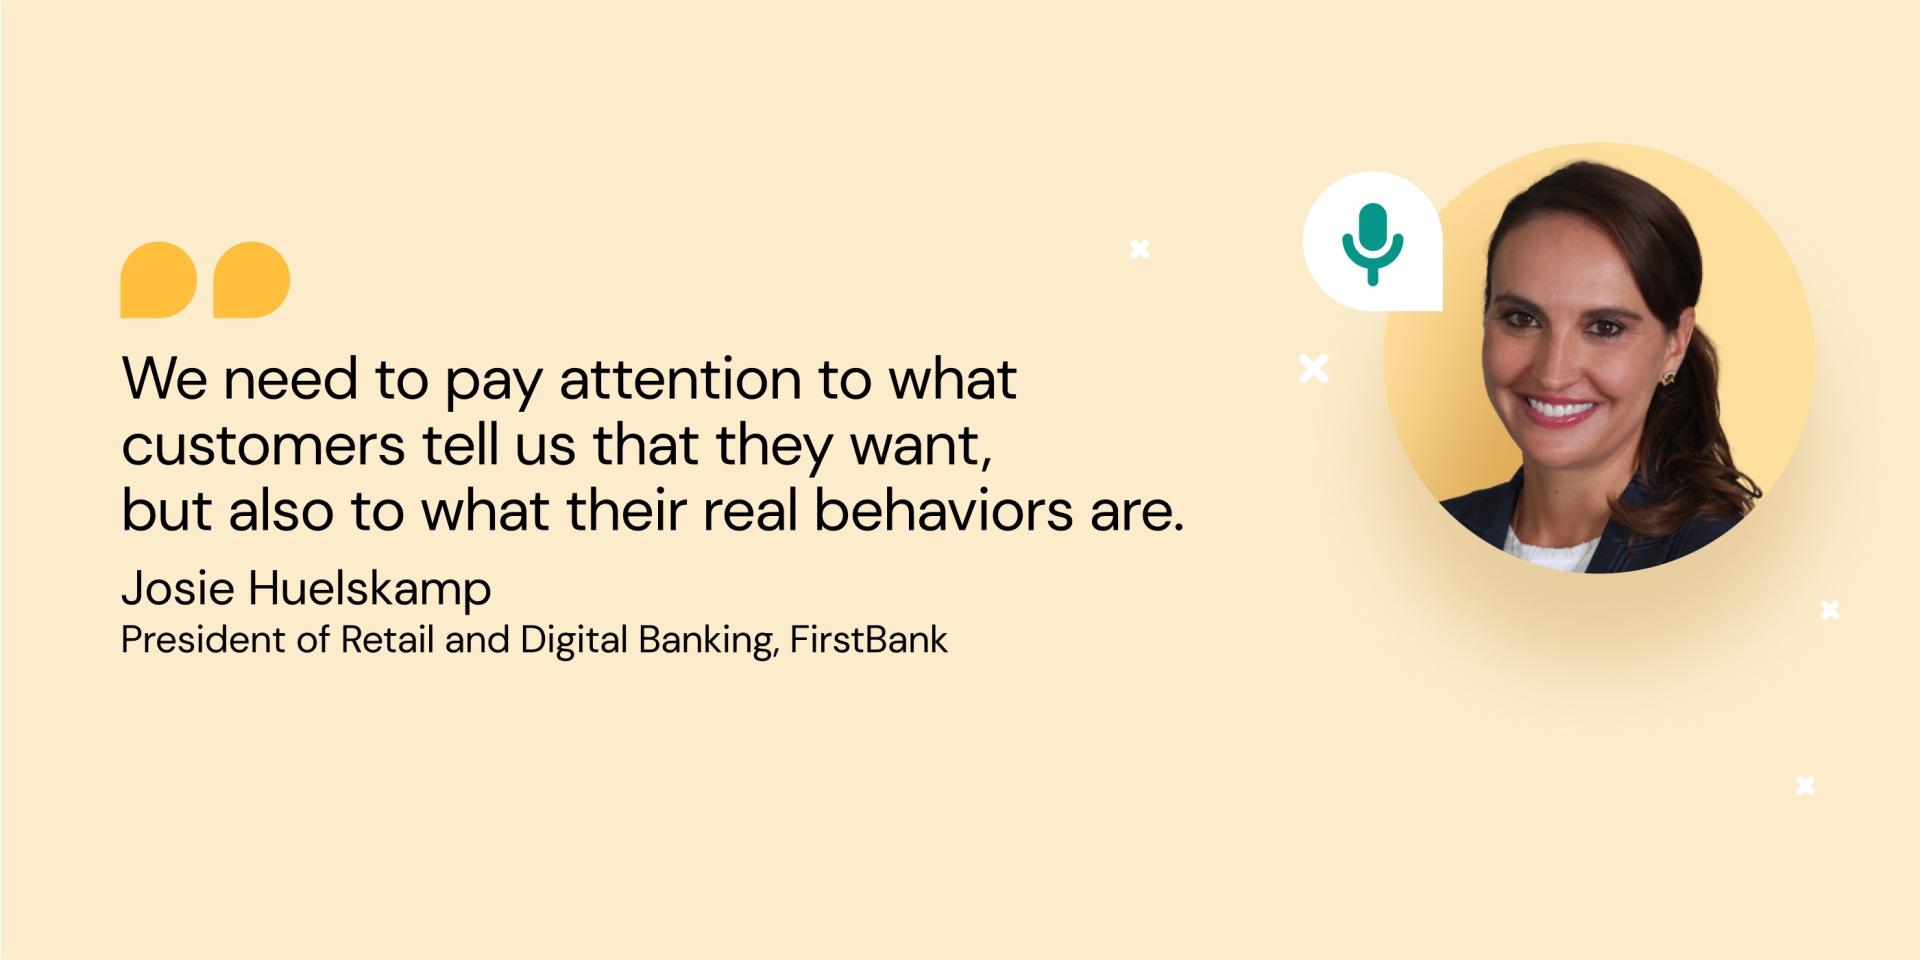 Quote from FirstBank's President of Retail and Digital Banking